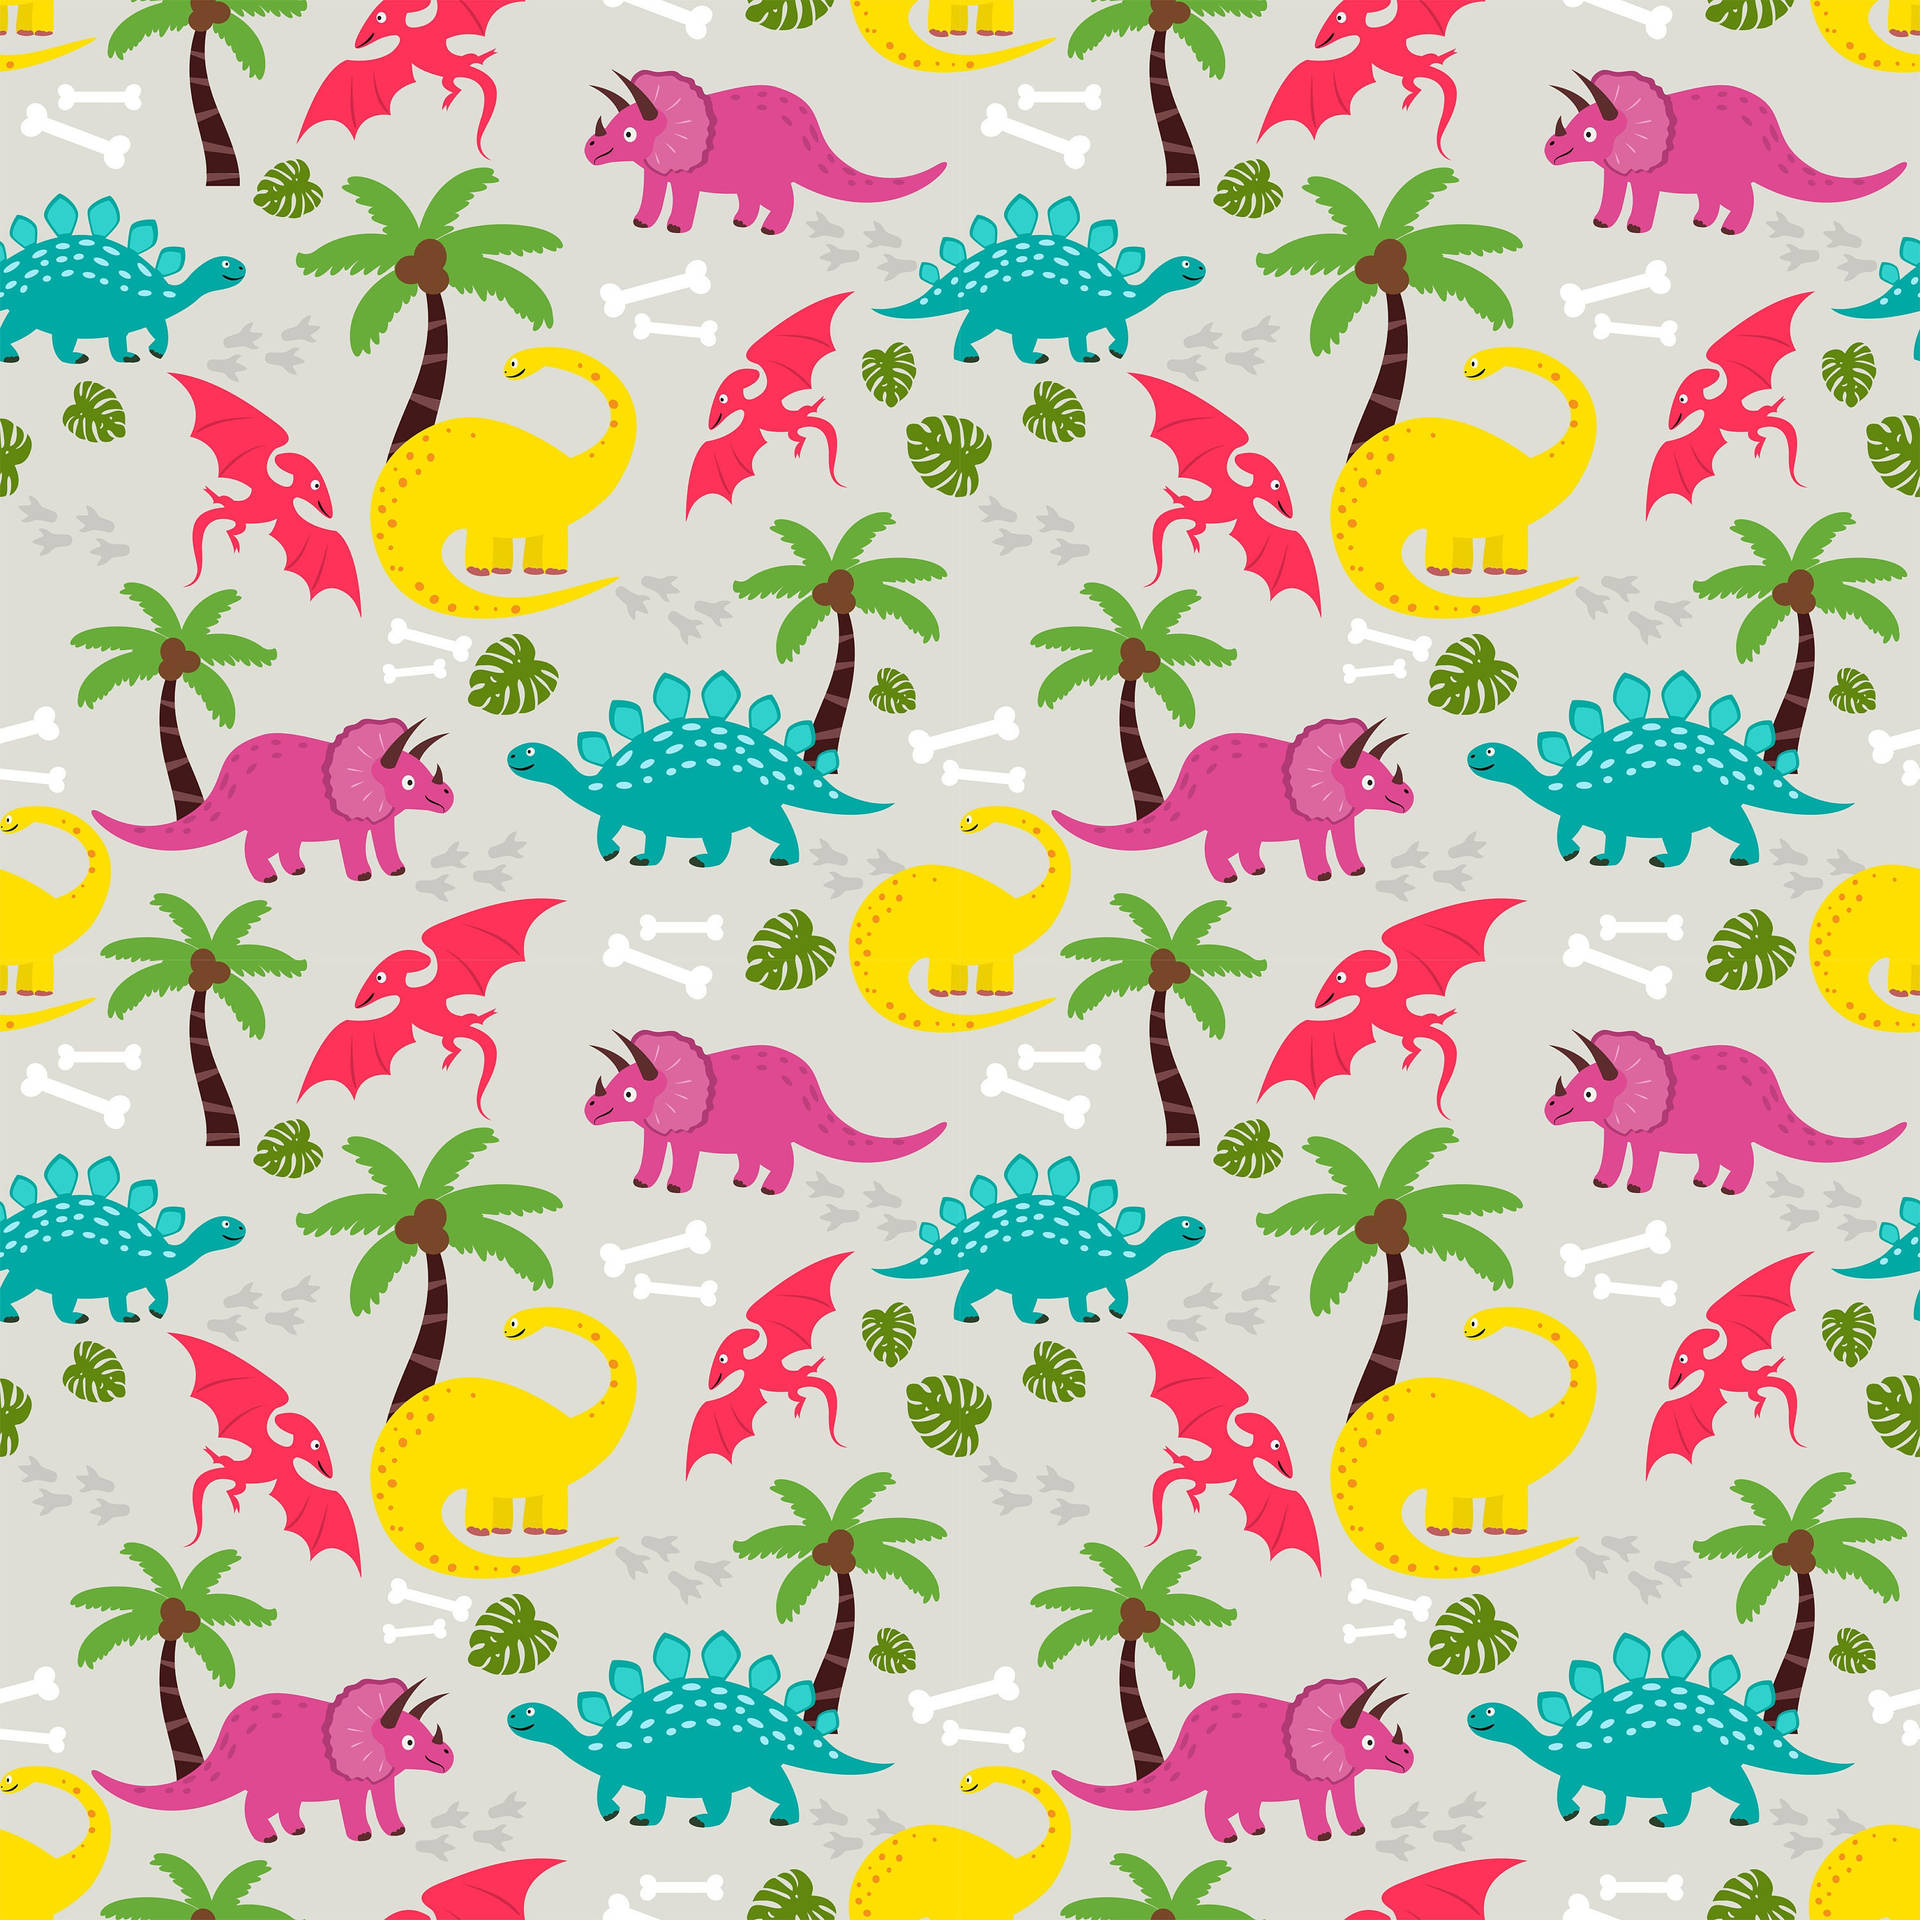 A Colorful Dinosaur Pattern With Palm Trees Wallpaper